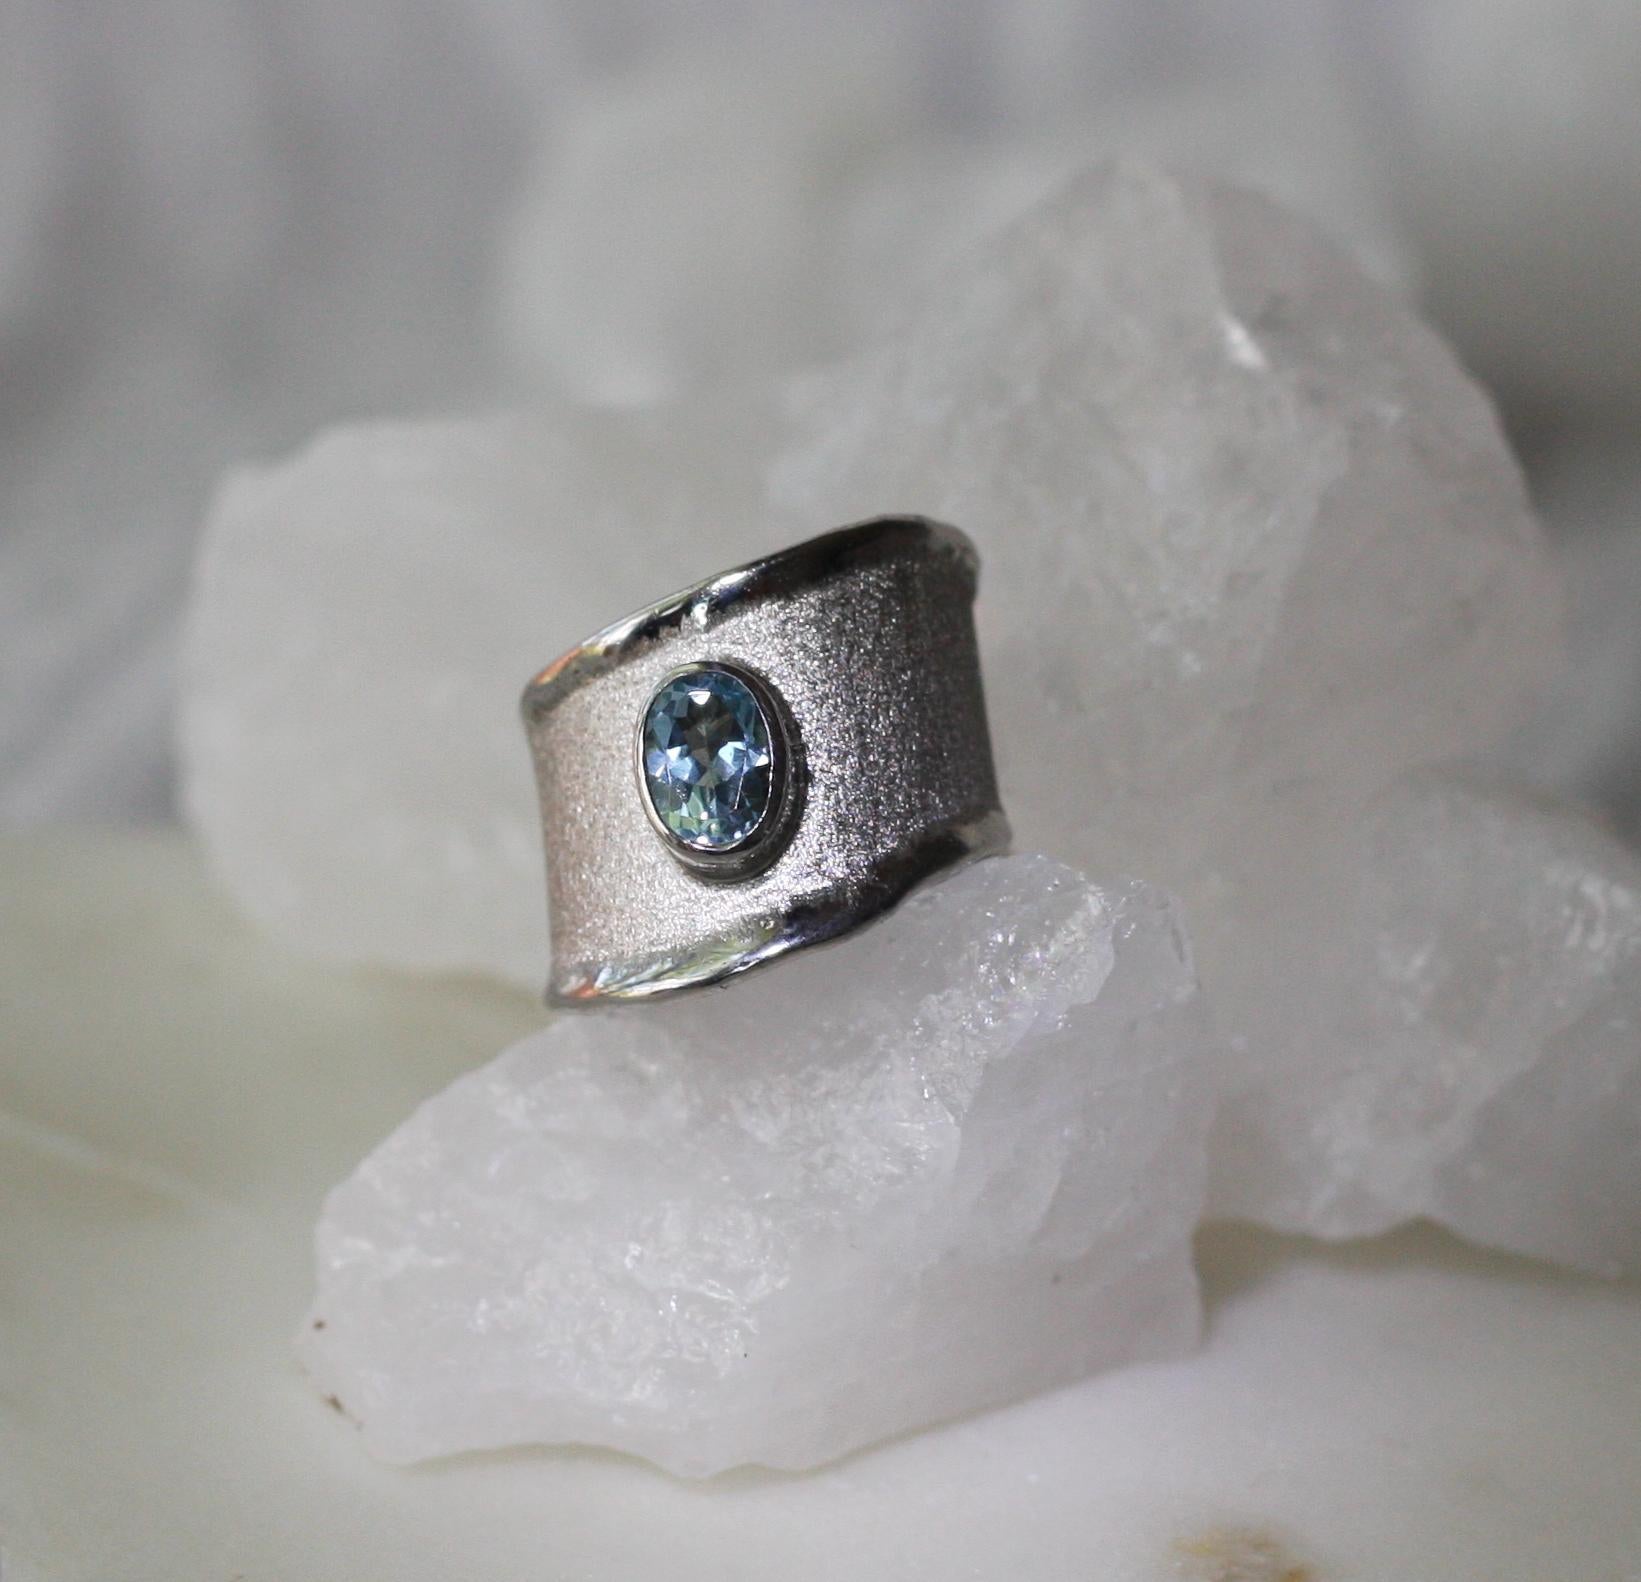 Presenting Yianni Creations fine silver artisan ring from Ammos Collection featuring 0.75 Carat oval cut aquamarine. The unique look of this simplified band is created by ancient techniques of craftsmanship - brushed texture and nature-inspired